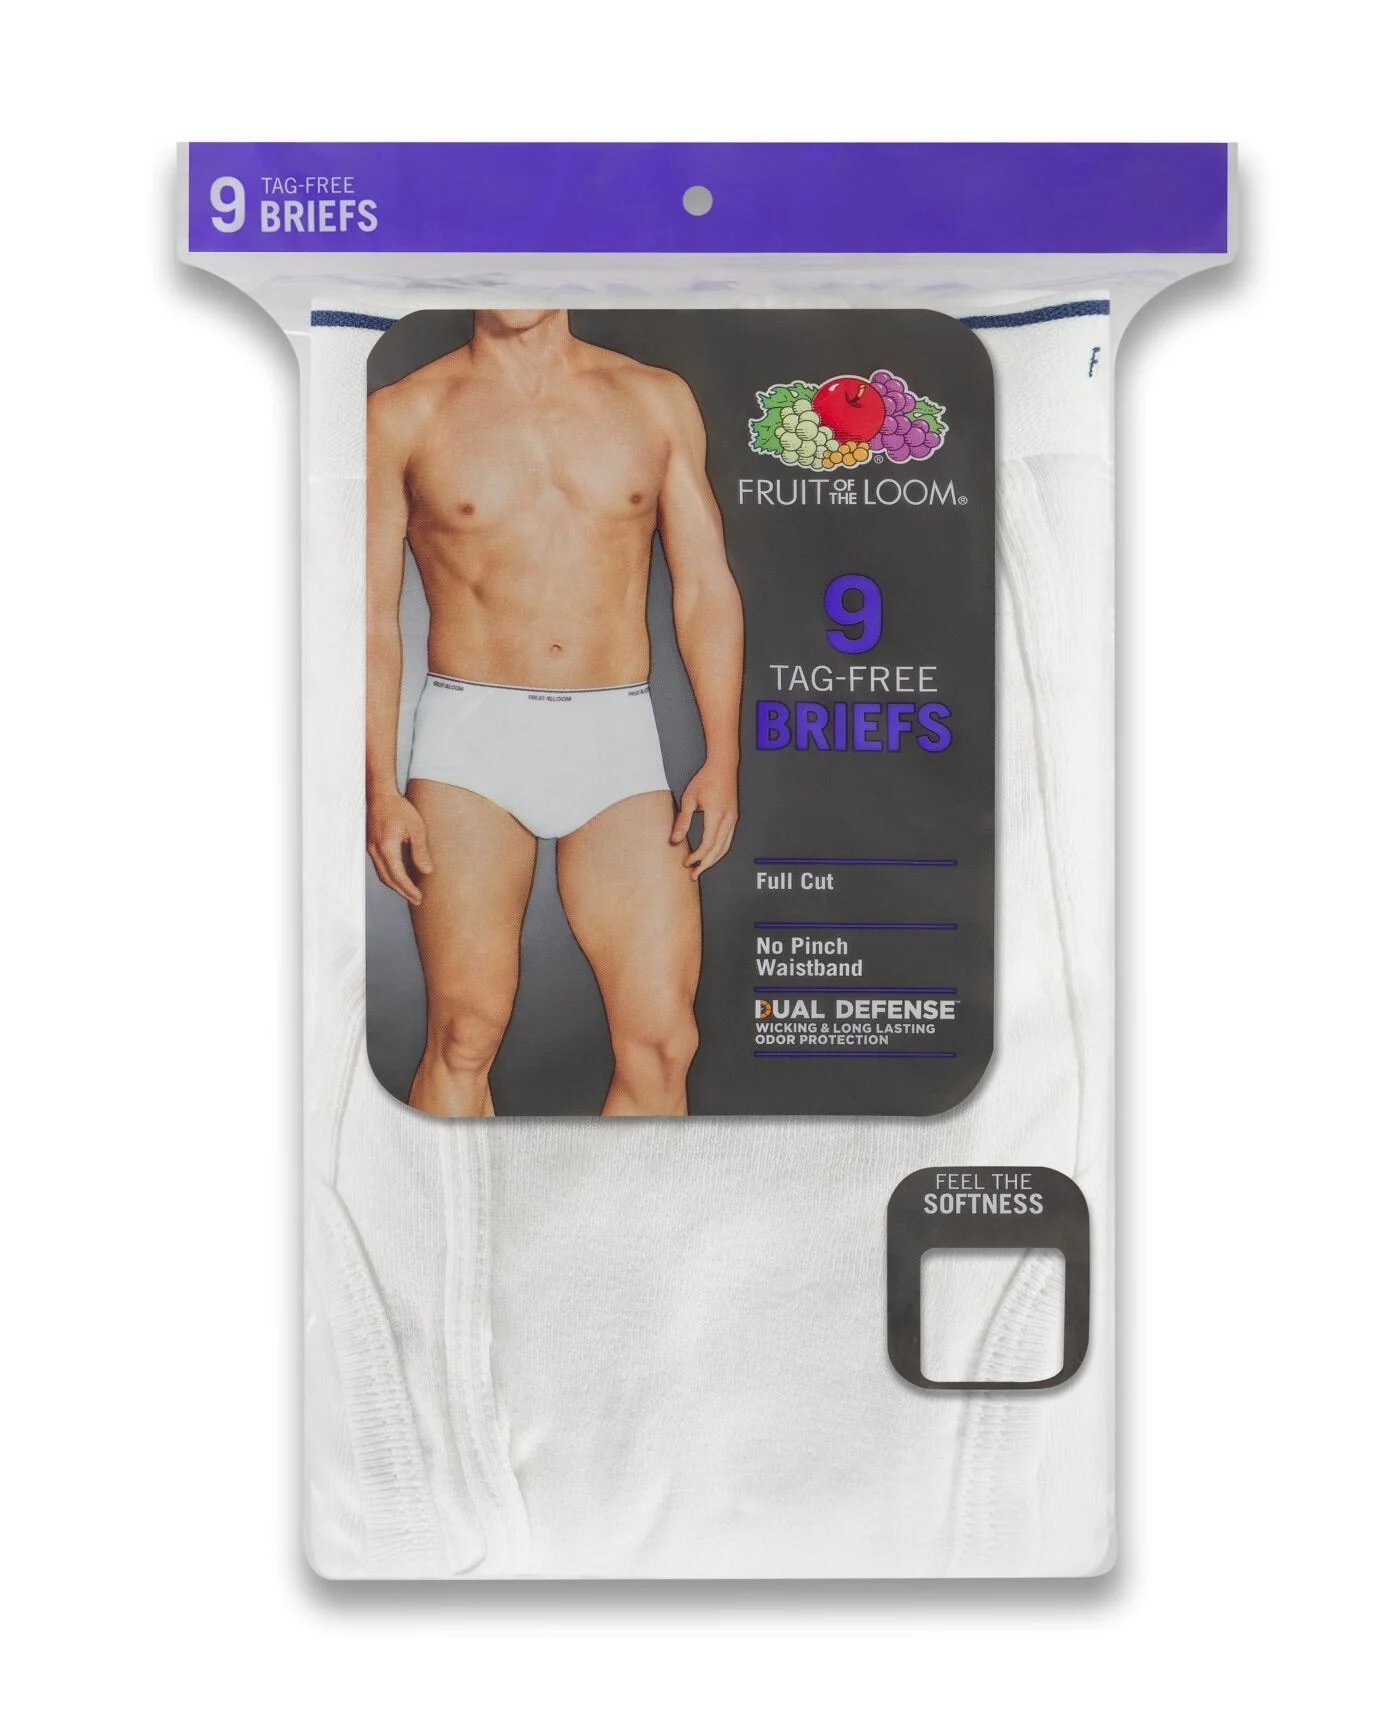 Fruit of the Loom Men's White Briefs, 9 Pack - image 5 of 6